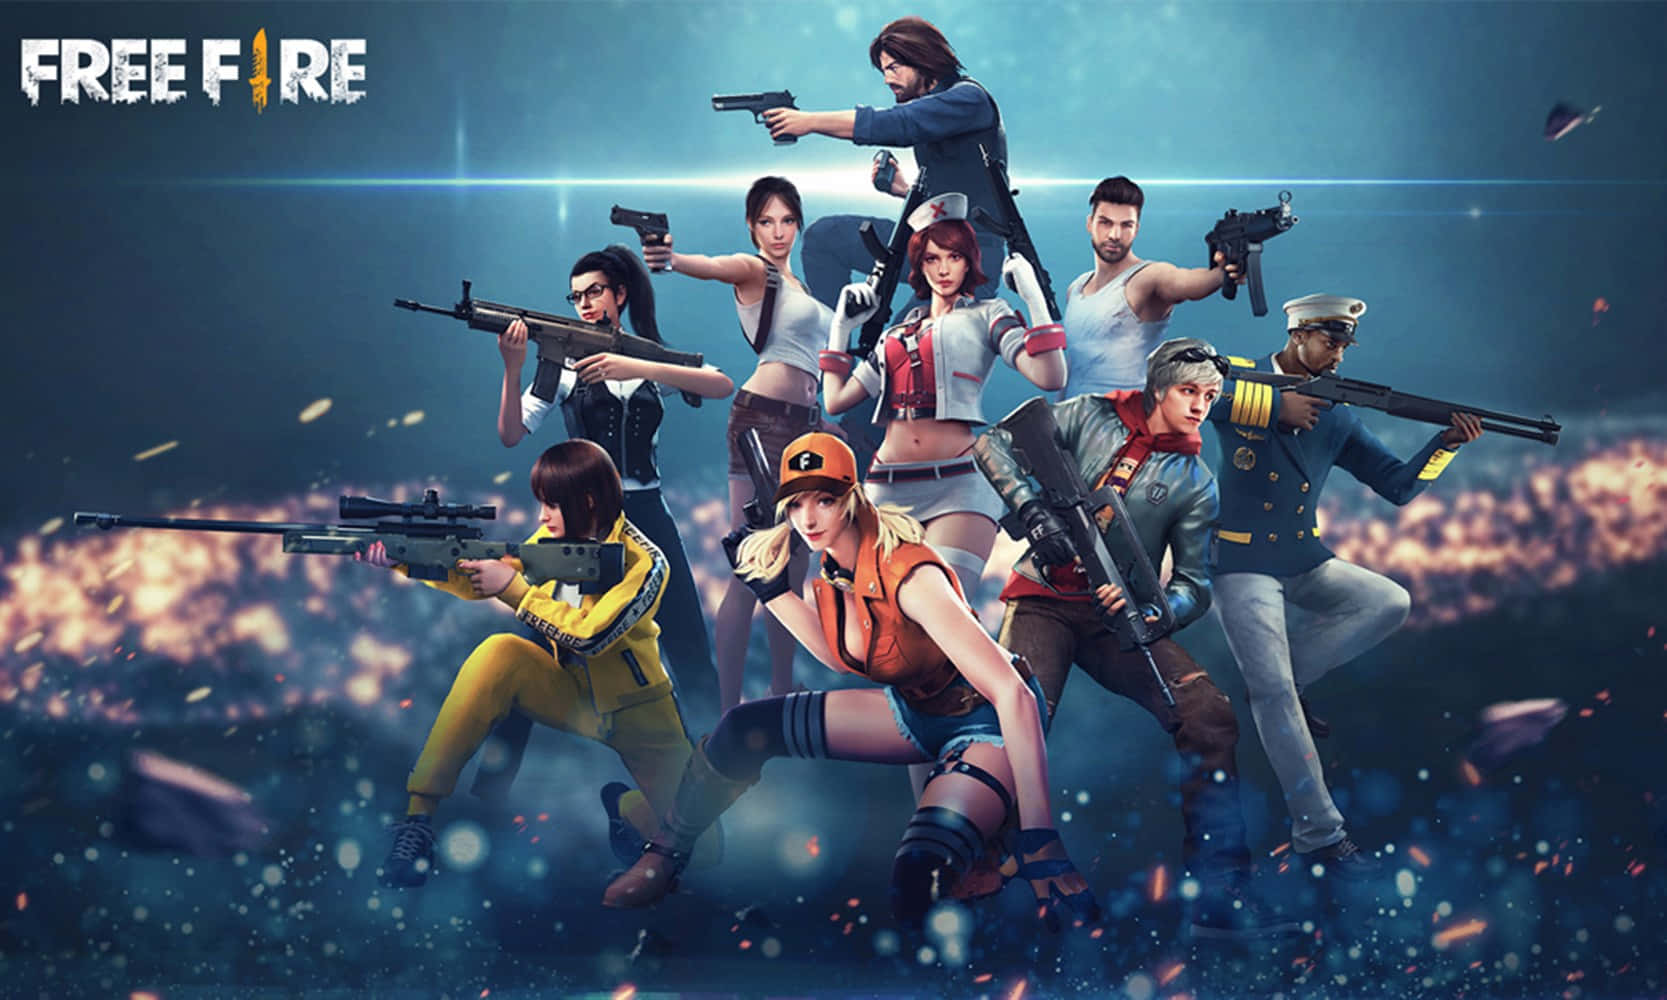 Uncover the mystery of Free Fire Chrono Wallpaper